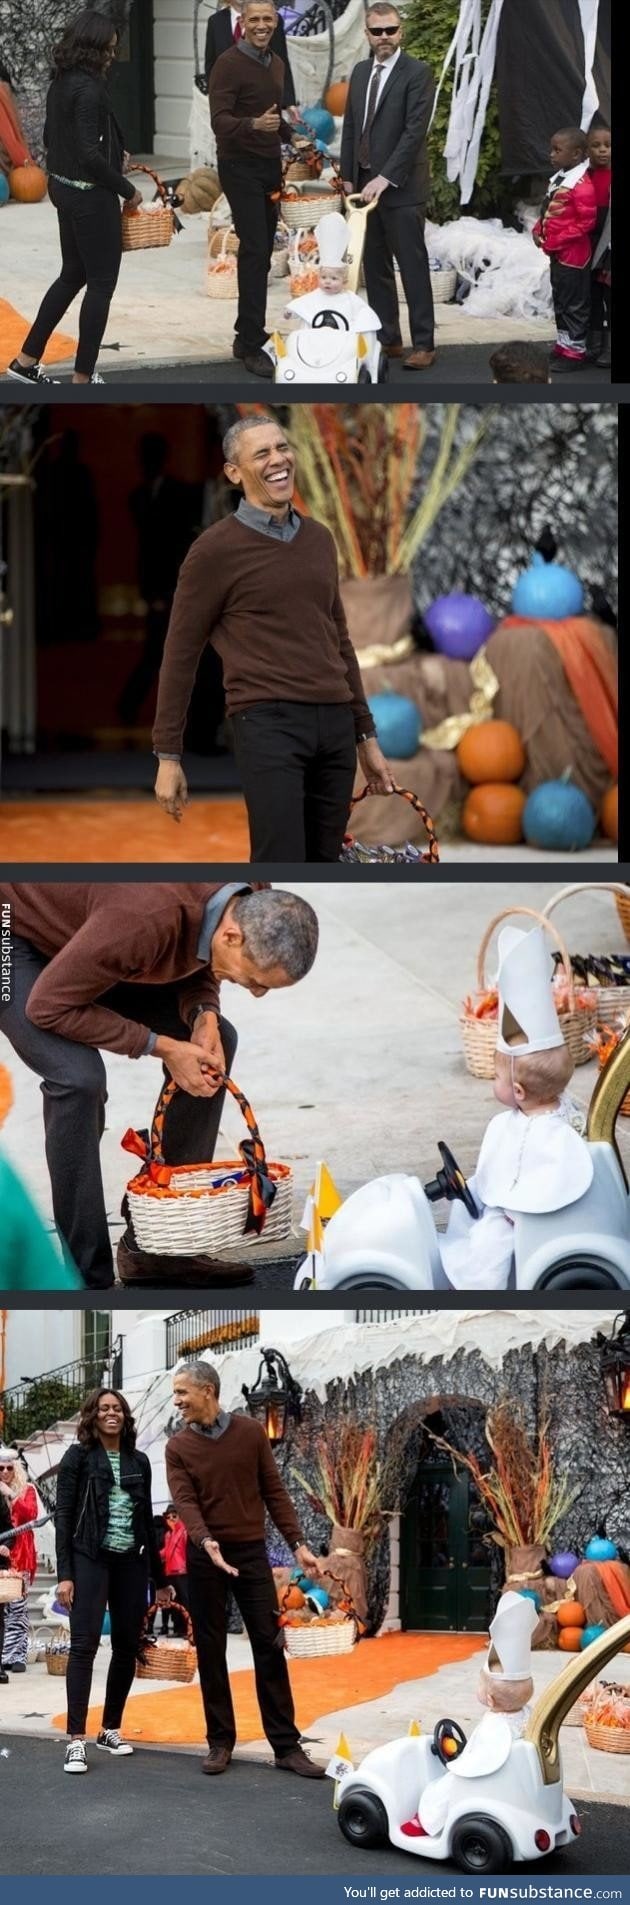 Obama's endearing reaction to a baby dressed as a pope